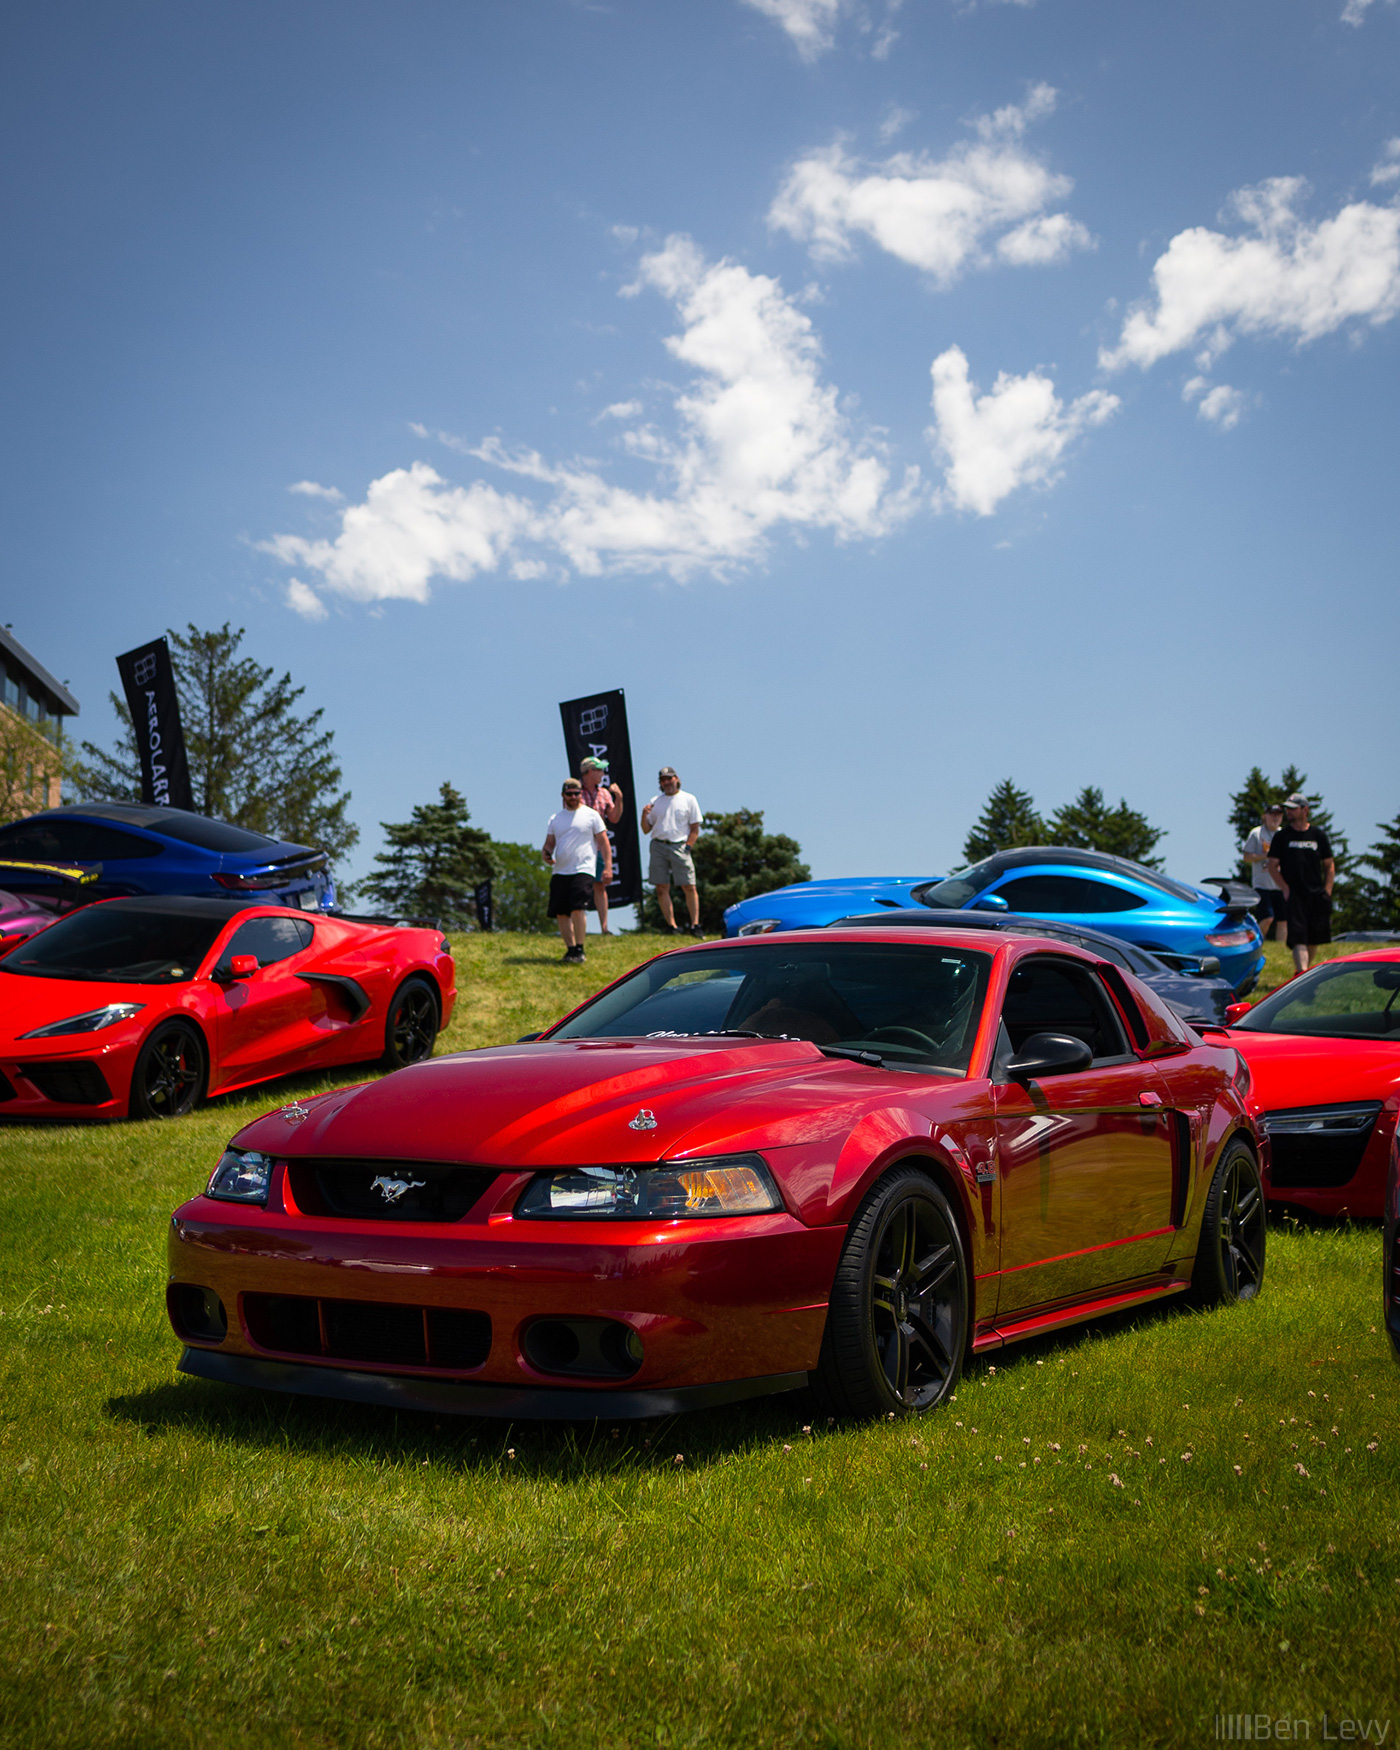 Red Ford Mustang GT Parked on the Lawn